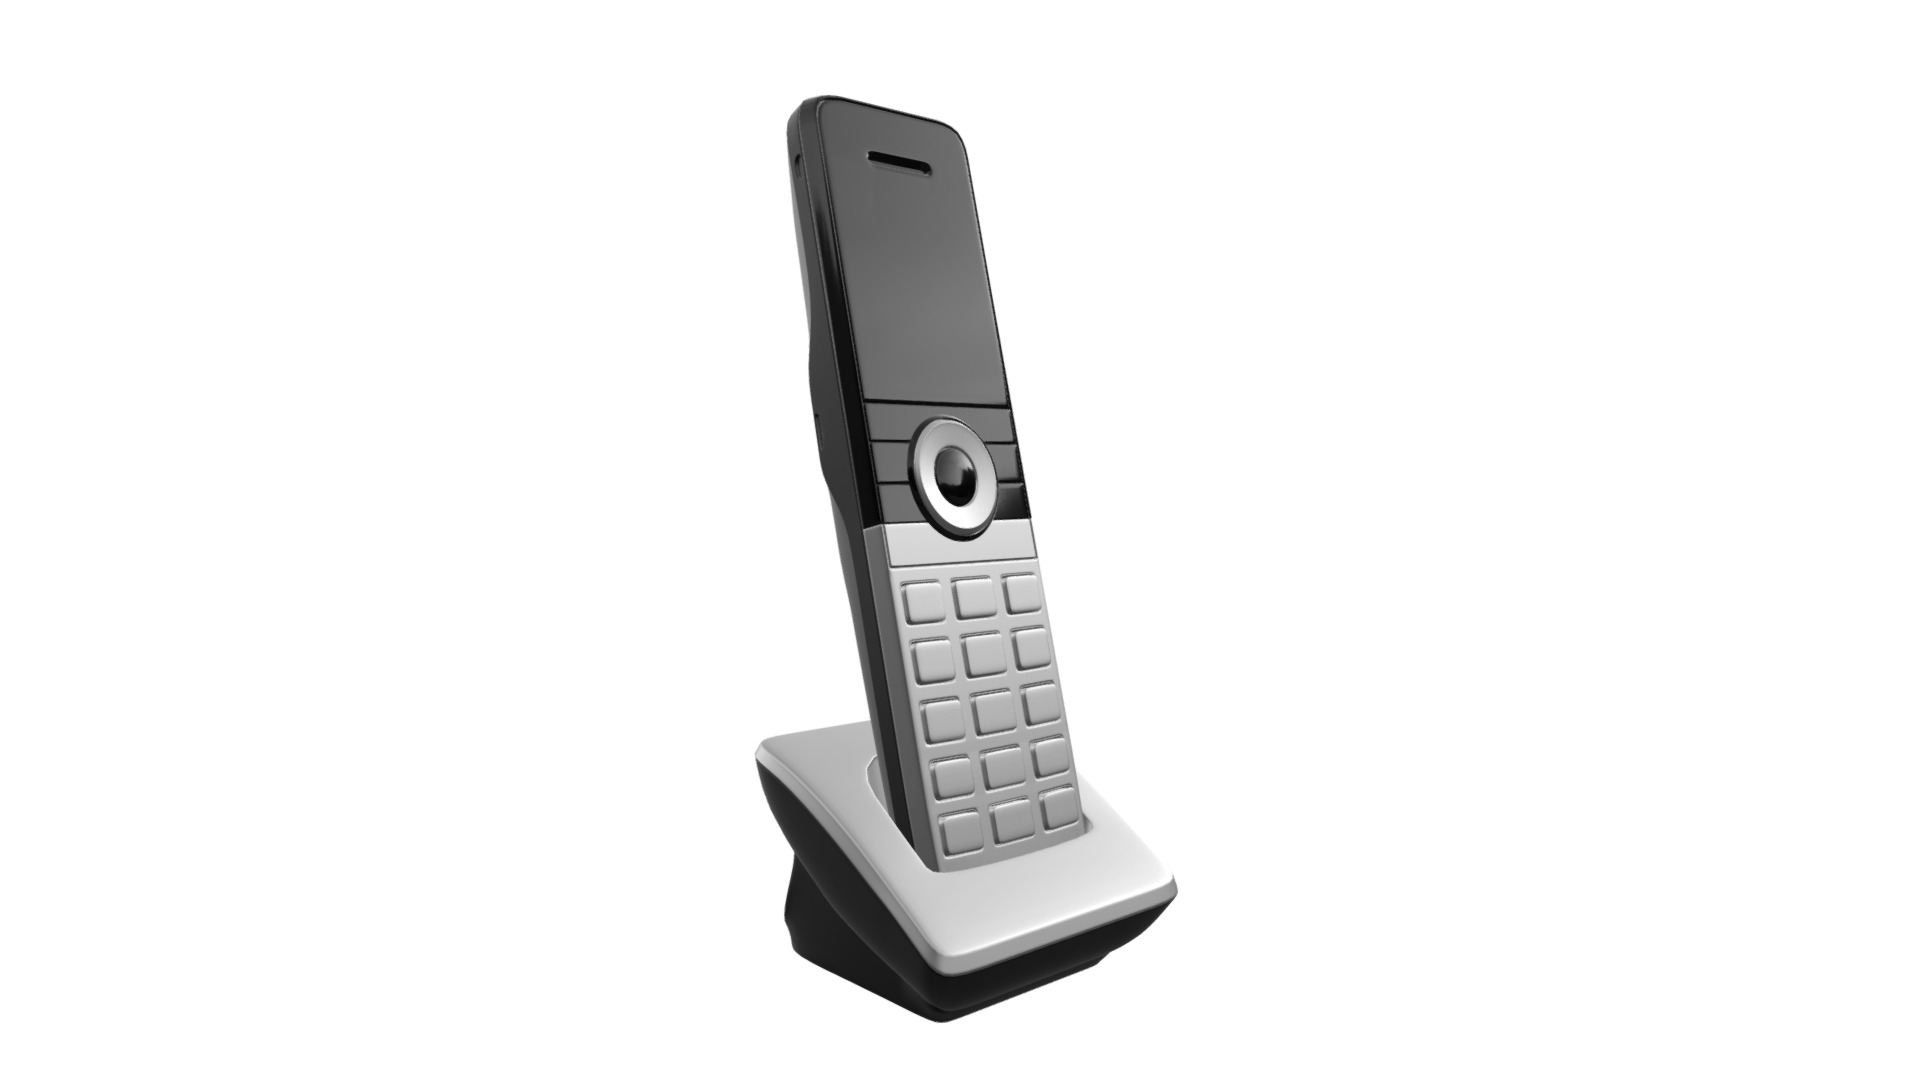 3D model Office cordless button phone - This is a 3D model of the Office cordless button phone. The 3D model is about a silver cell phone.